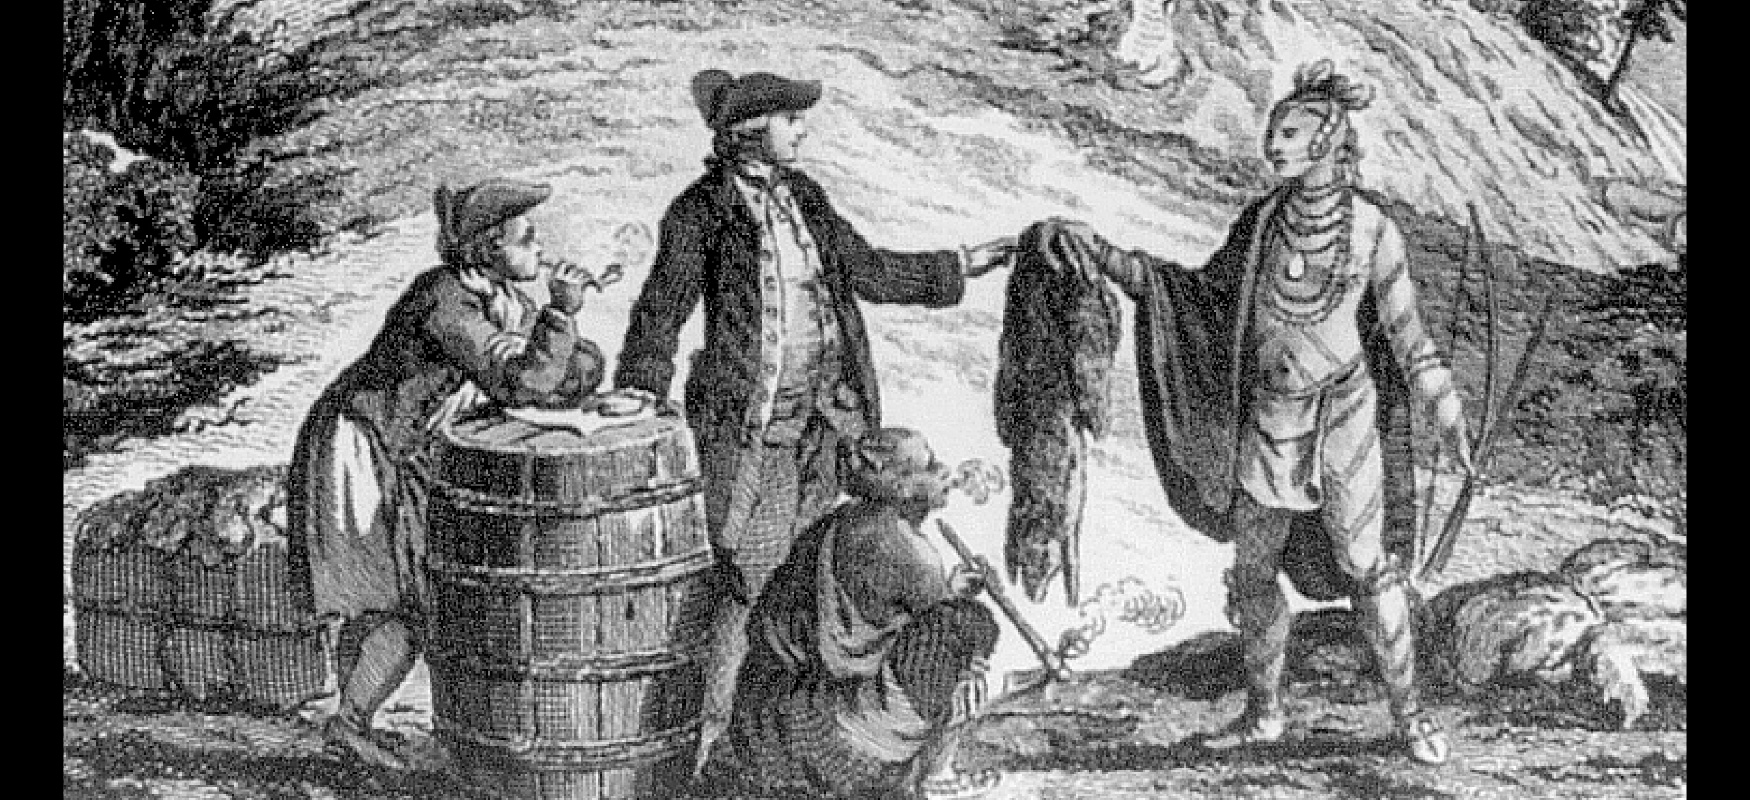 A black and white image is shown of two European men and two Native Americans. The European men are dressed in long coats, knickers, and hats. One of them leans on a barrel while smoking a short pipe while the other one stands with his right hand on the barrel, extending his left arm to a Native American man handing him an animal fur. The Native American man wears a loincloth, several necklaces, moccasins, has a cloth draped over his right shoulder, wears jewelry on his head, and stands in front of a pile of animal furs. His body is striped with paint, and he holds a bow and arrow in his other hand. The second Native American man squats to the right of the barrel wearing a cloth around his left shoulder, pants, and moccasins, while smoking a long pipe and blowing smoke out his mouth. In the left corner of the image a large package tied with strings sits on the ground and rocks, hills, and sparse bushes can be seen in the background.